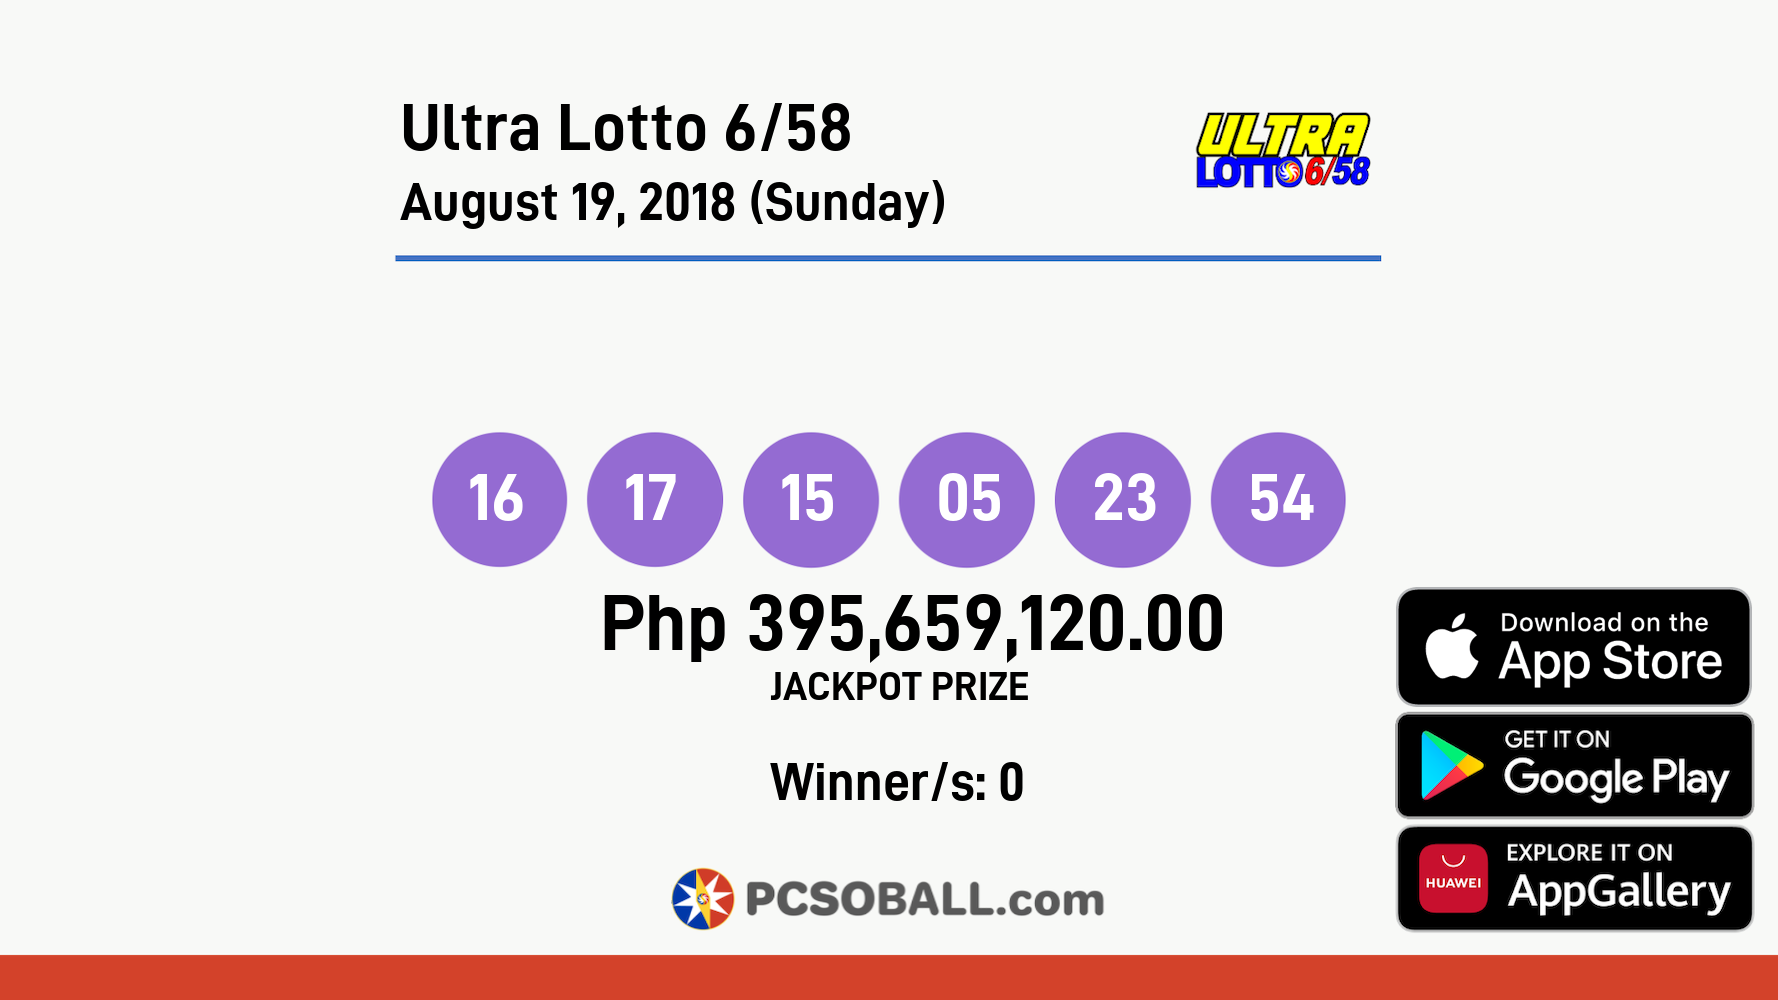 Ultra Lotto 6/58 August 19, 2018 (Sunday) Result